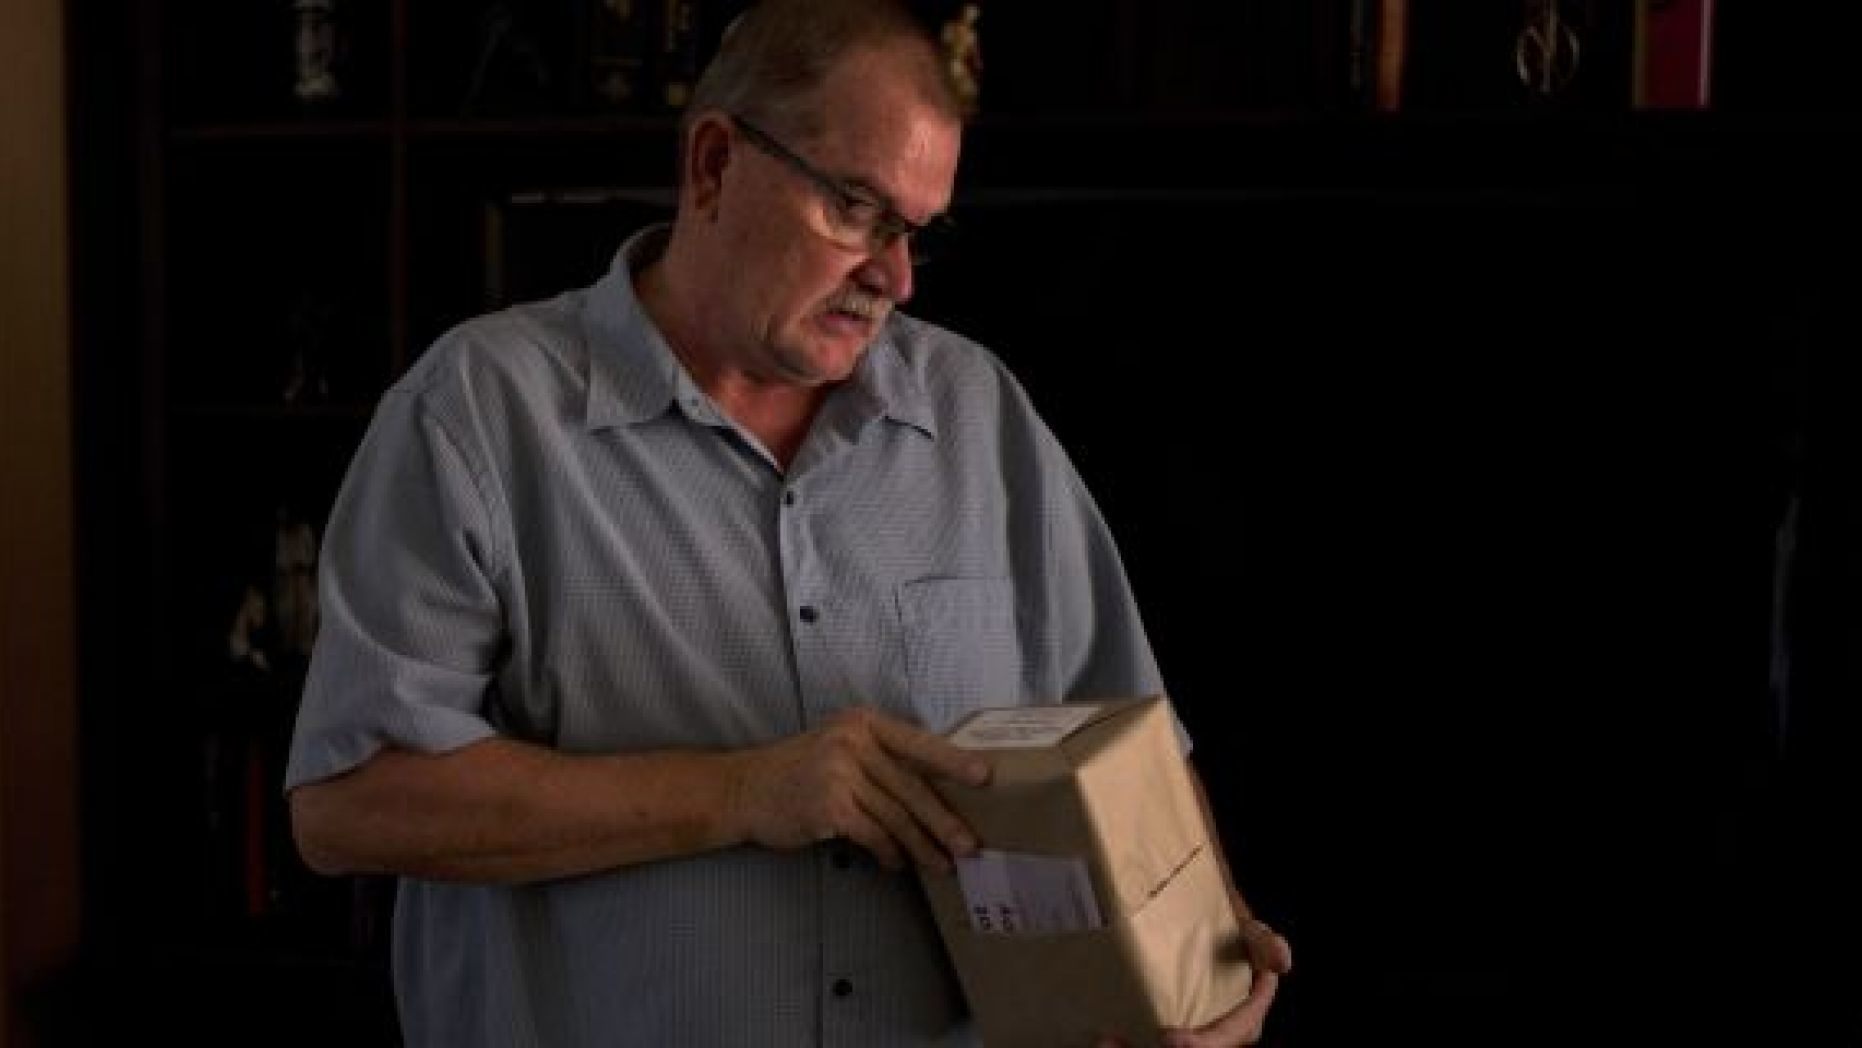 Doug Biggers, whose 20-year-old son, Landon, died of opioid overdose in 2017, looks at an unopened package containing the ashes of his son in La Quinta, Calif.